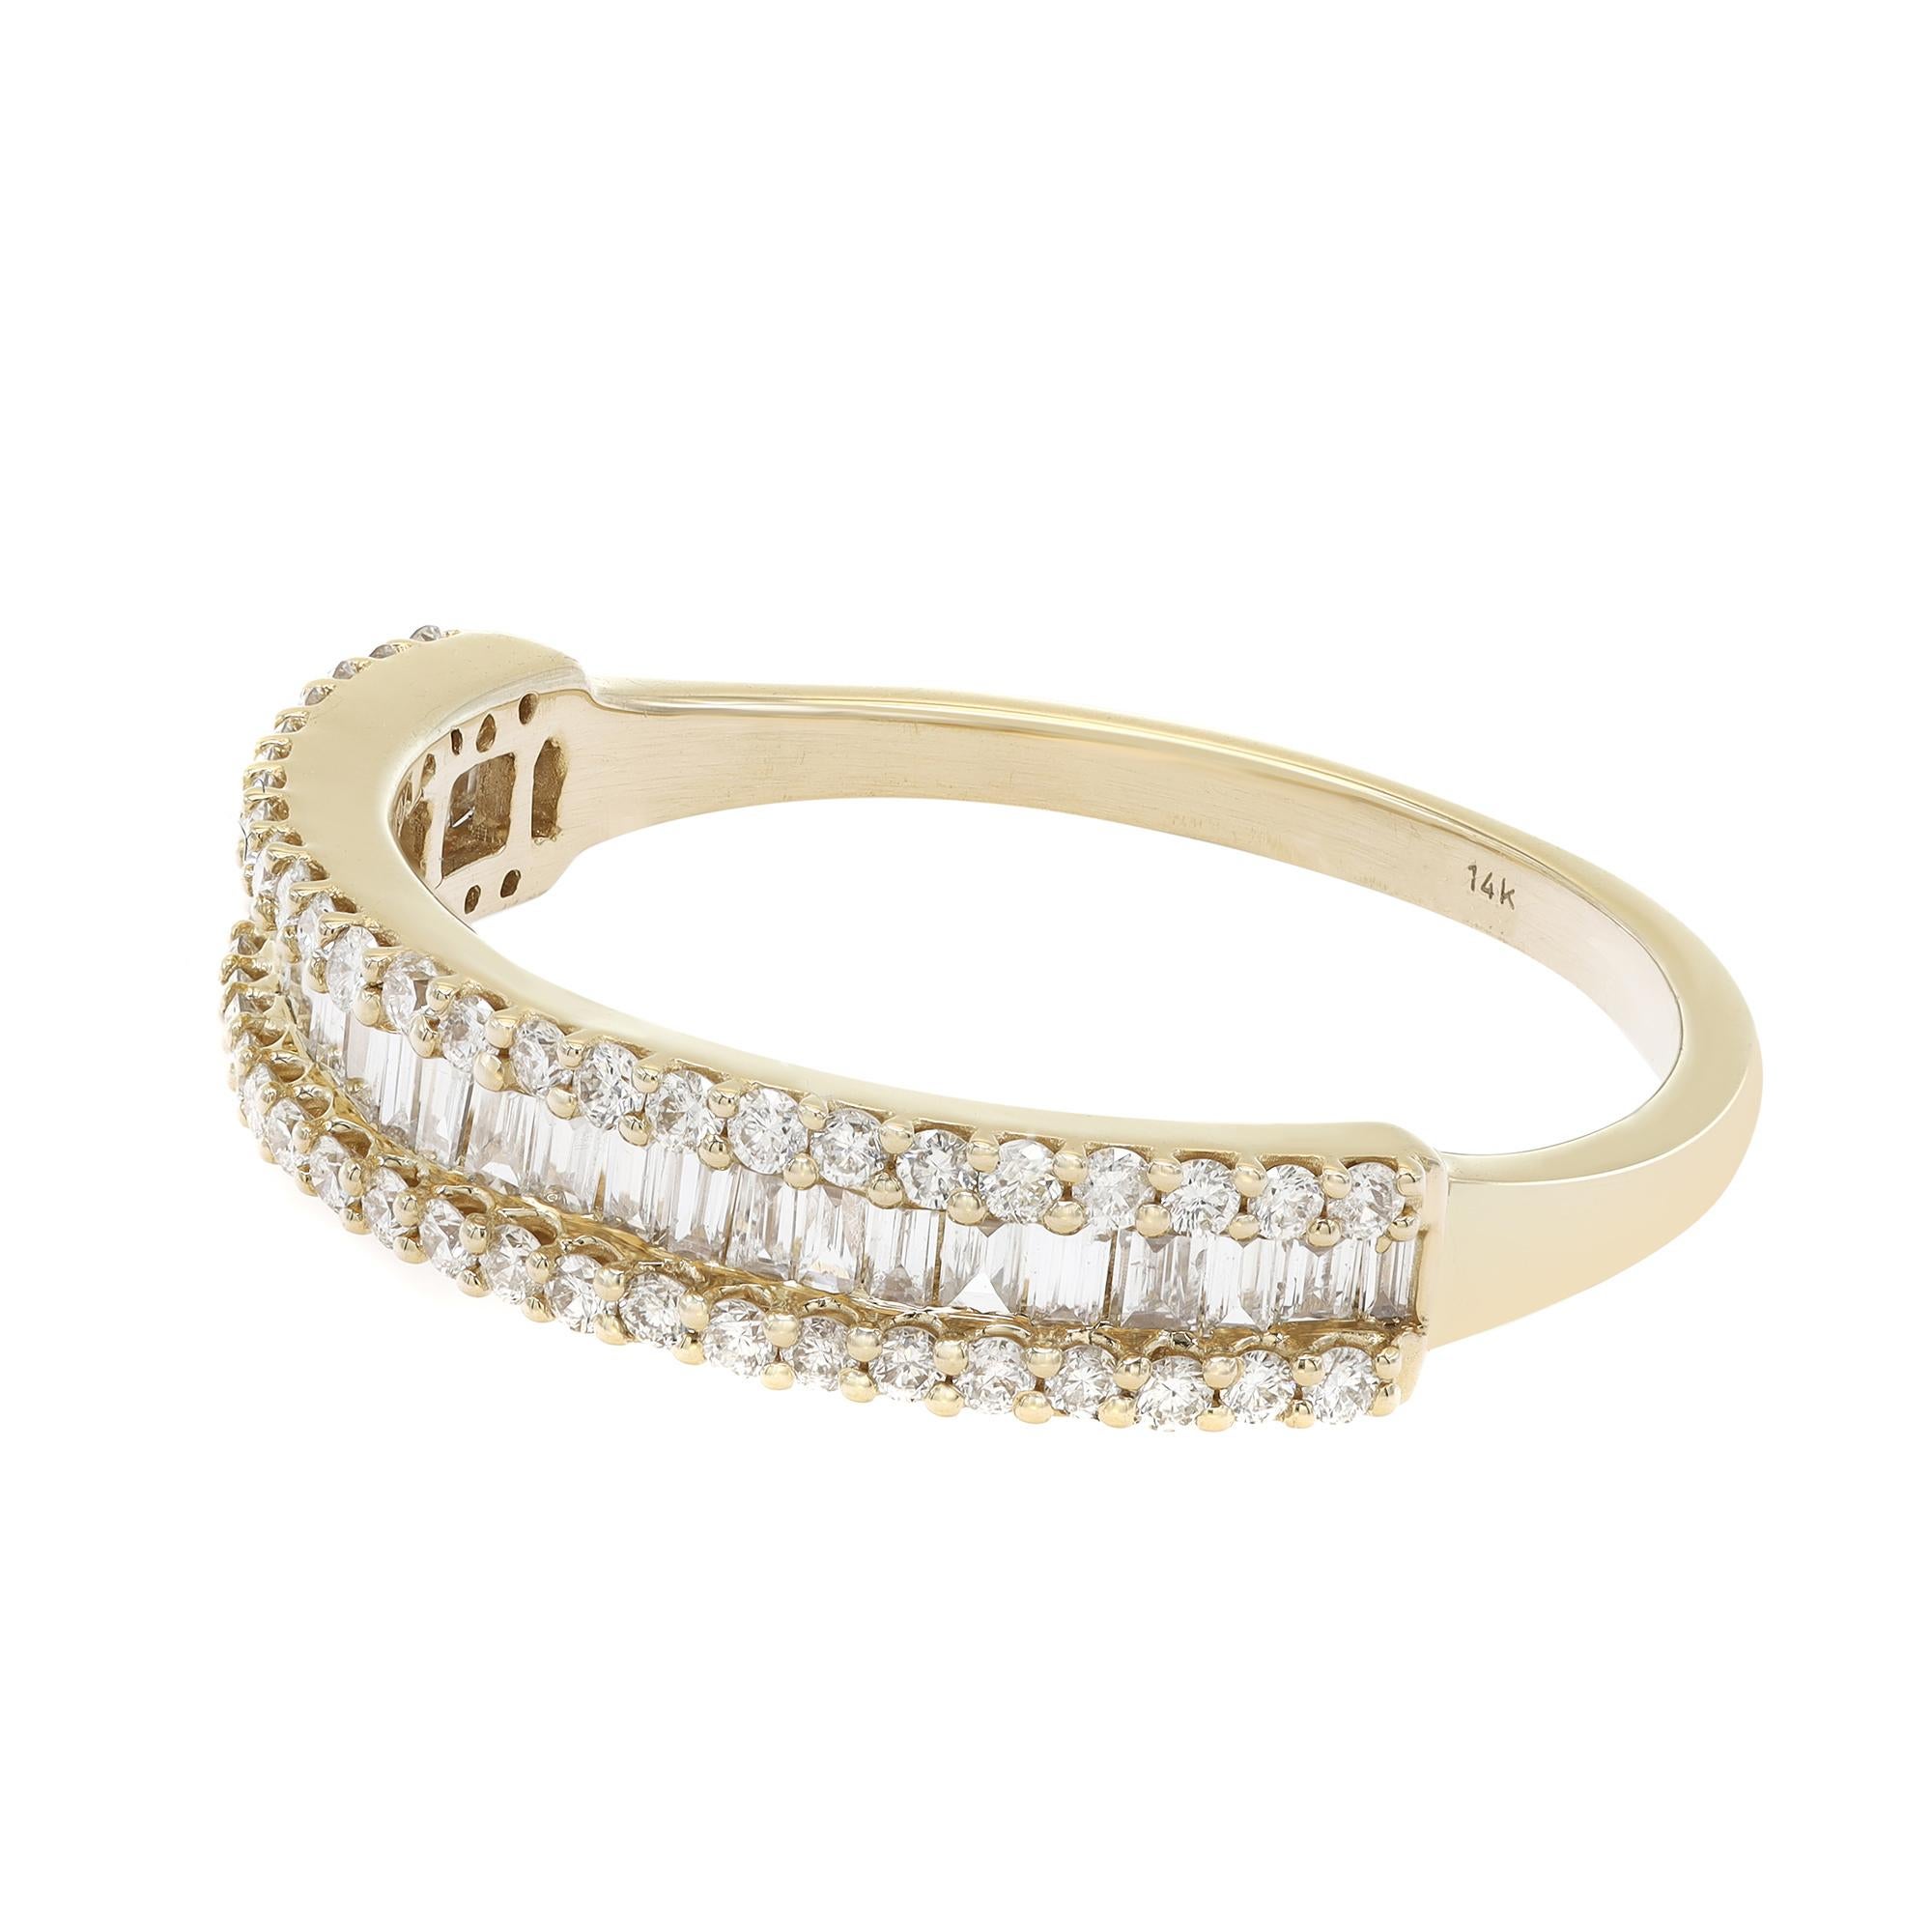 Timeless and stylish diamond ring, crafted in 14k yellow gold. This ring features 77 dazzling baguette cut and round cut diamonds in channel and pave setting. Perfect for a gift or as a promise ring. Total diamond weight: 0.47ct. Diamond color G-H